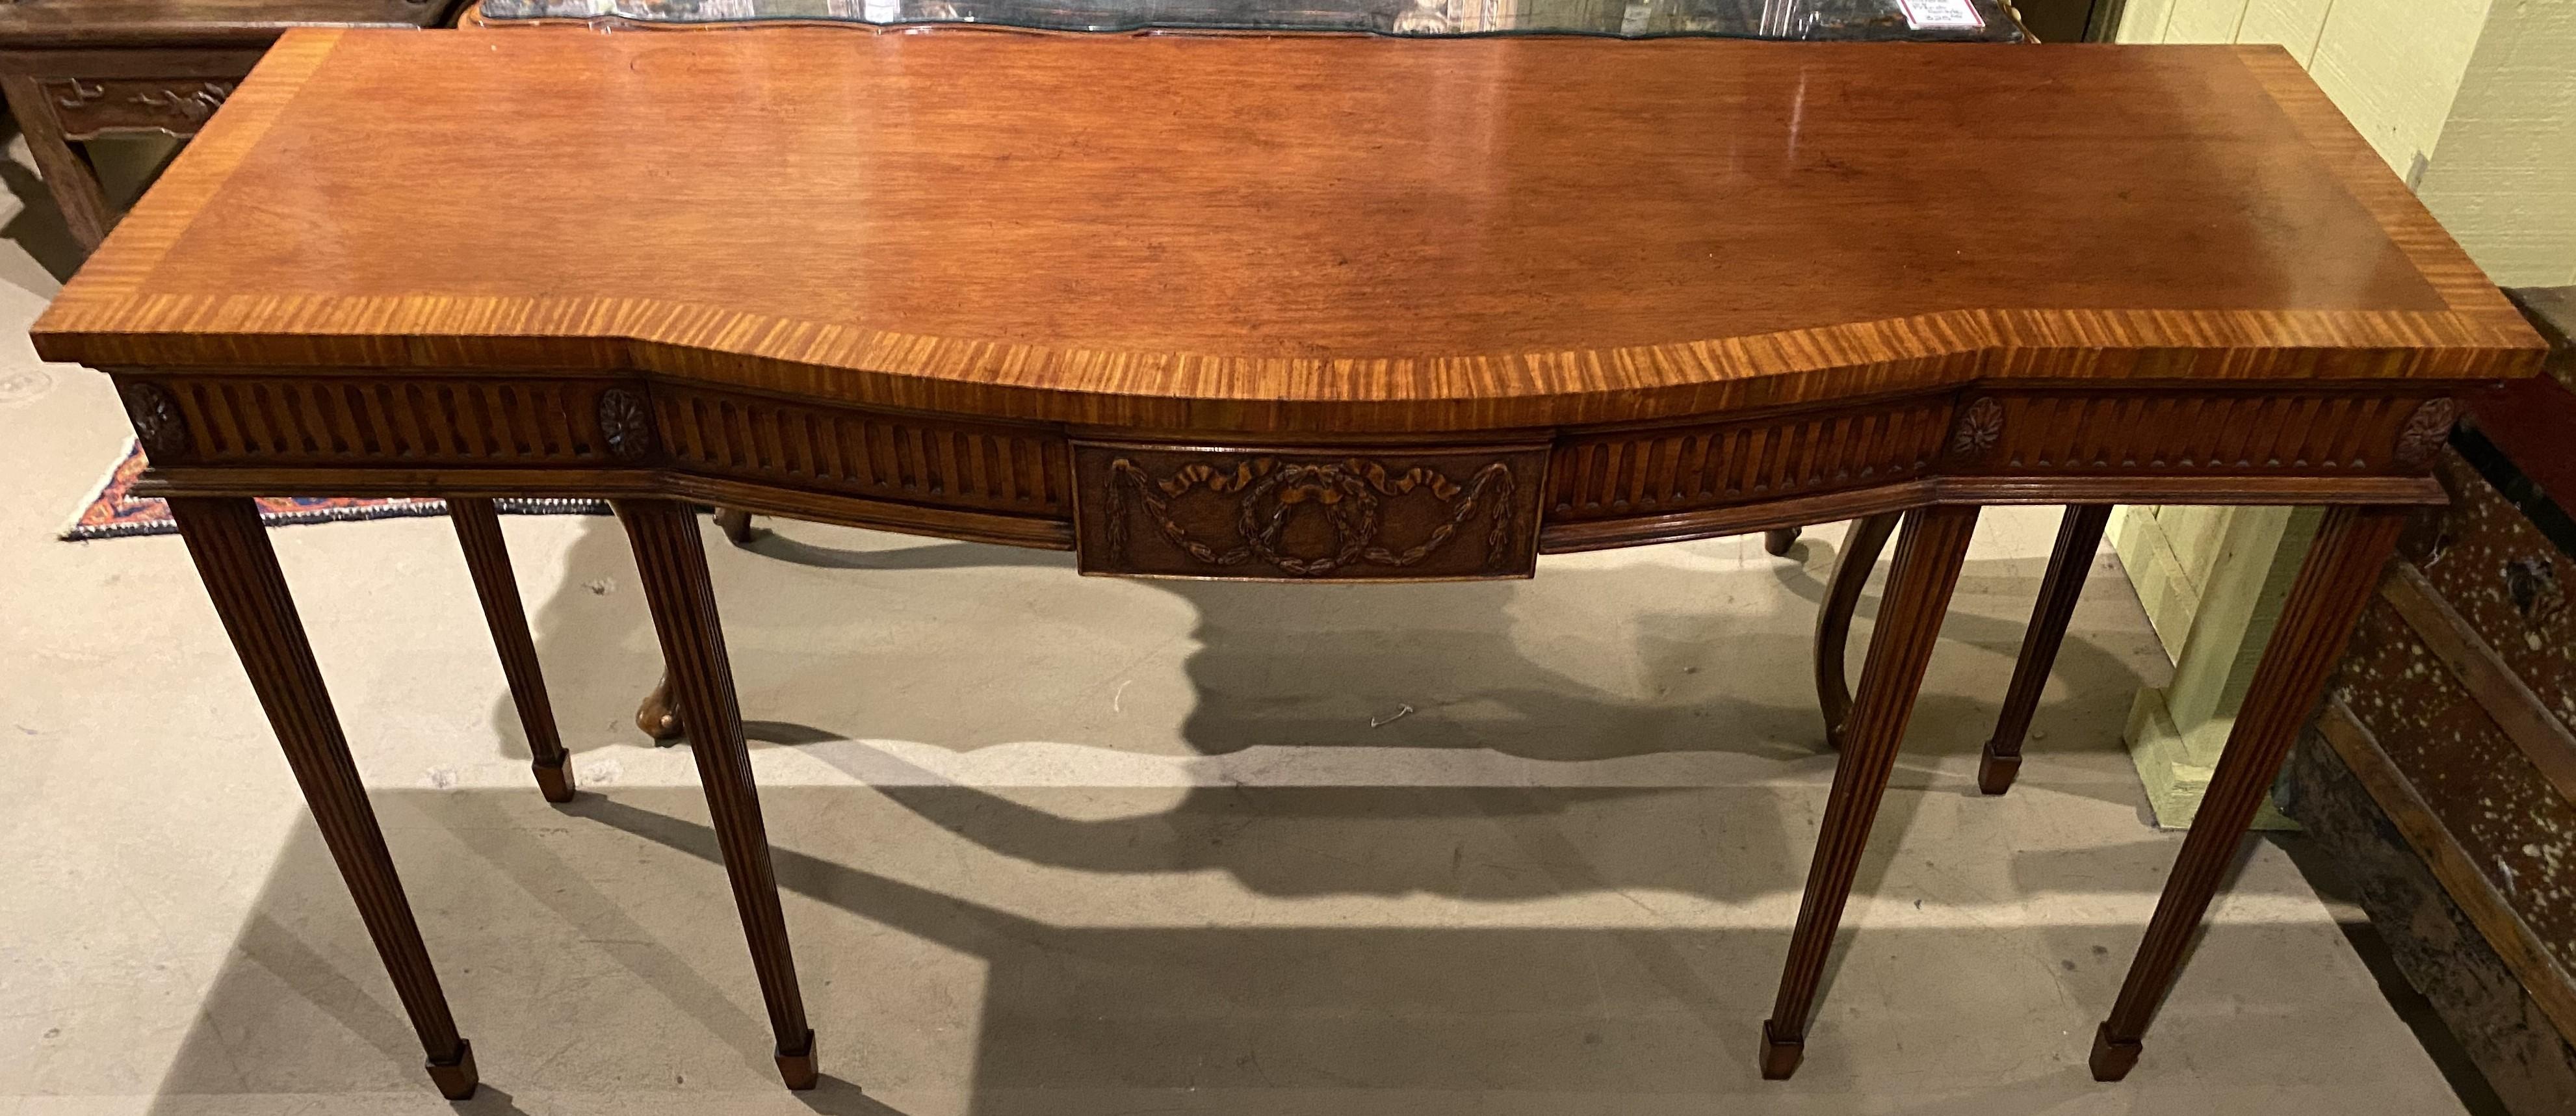 A fine example of an Adam style English mahogany serpentine front server or sideboard with conforming top with crossbanded veneer border surmounting a single fitted frieze drawer with center carved wreath/swag cartouche, carved foliate corner